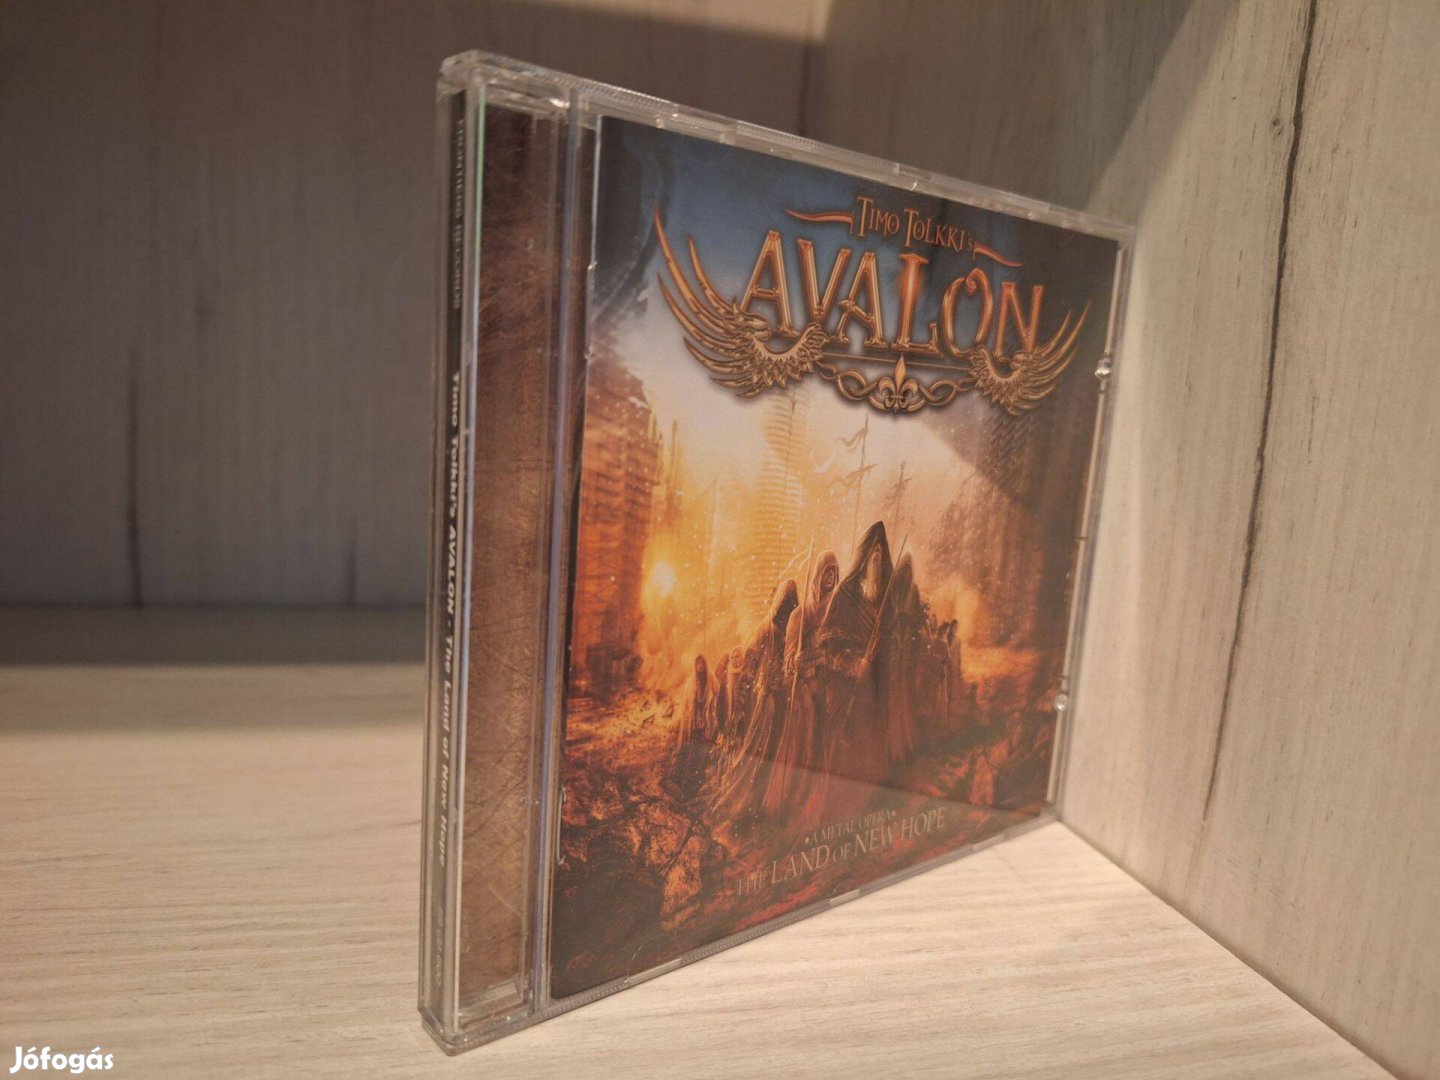 Timo Tolkki's Avalon - The Land Of New Hope - A Metal Opera CD